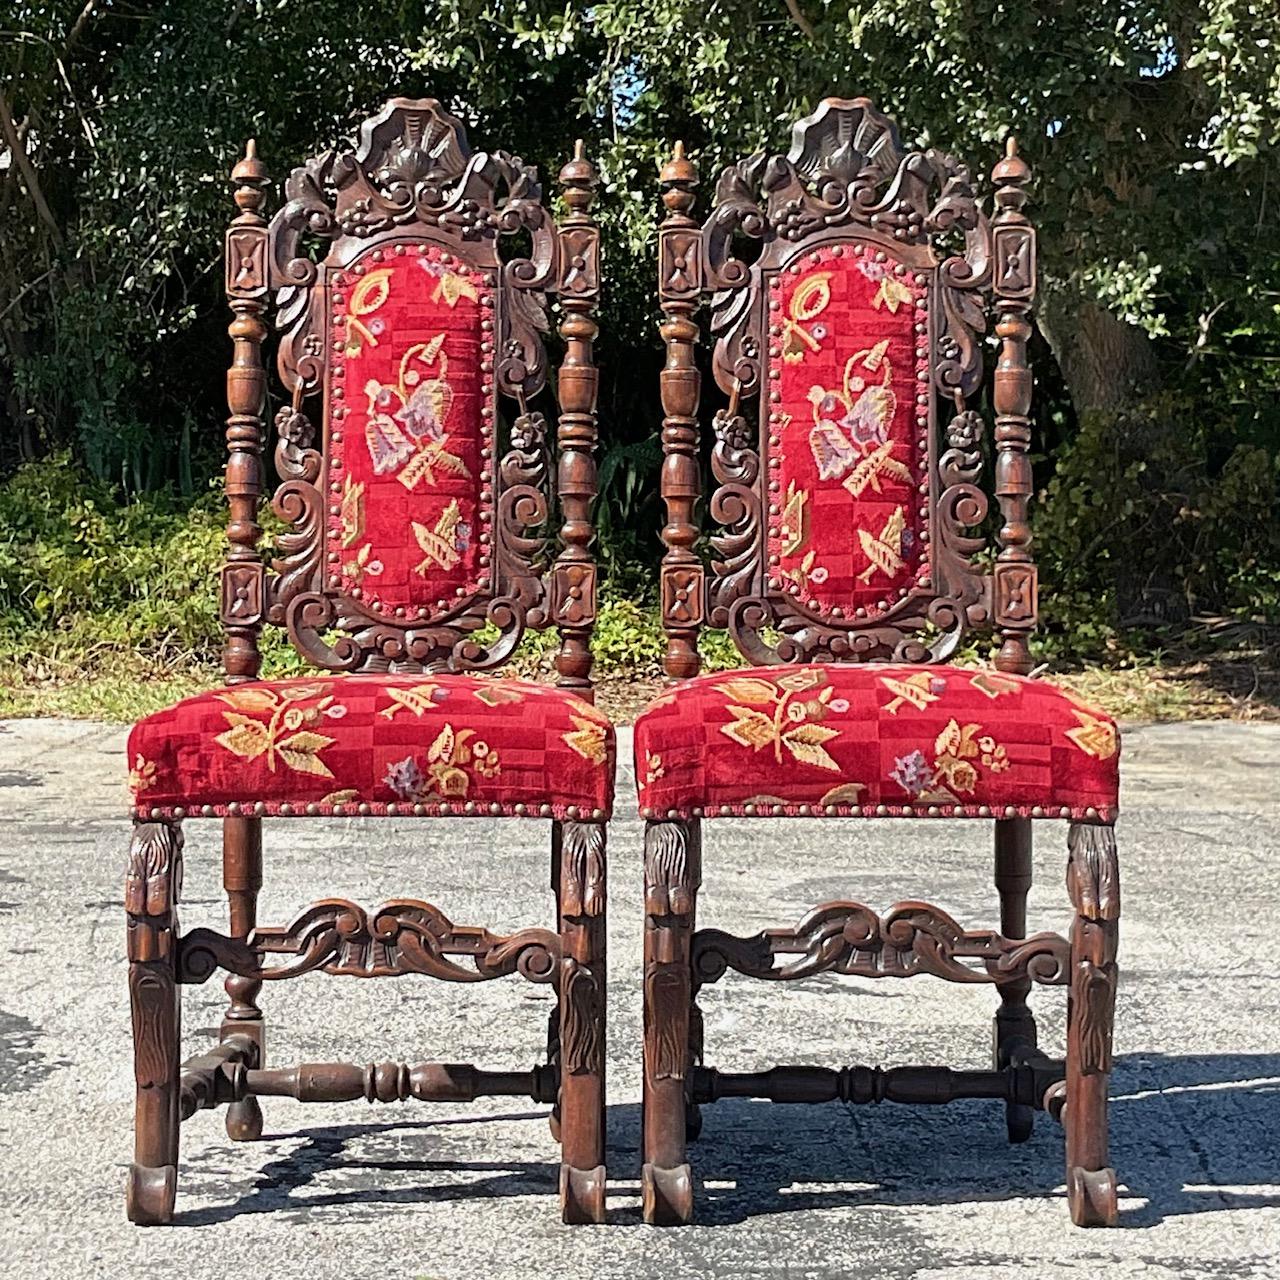 Regency Vintage Gothic Carved Wood Dining Chairs - a Pair For Sale